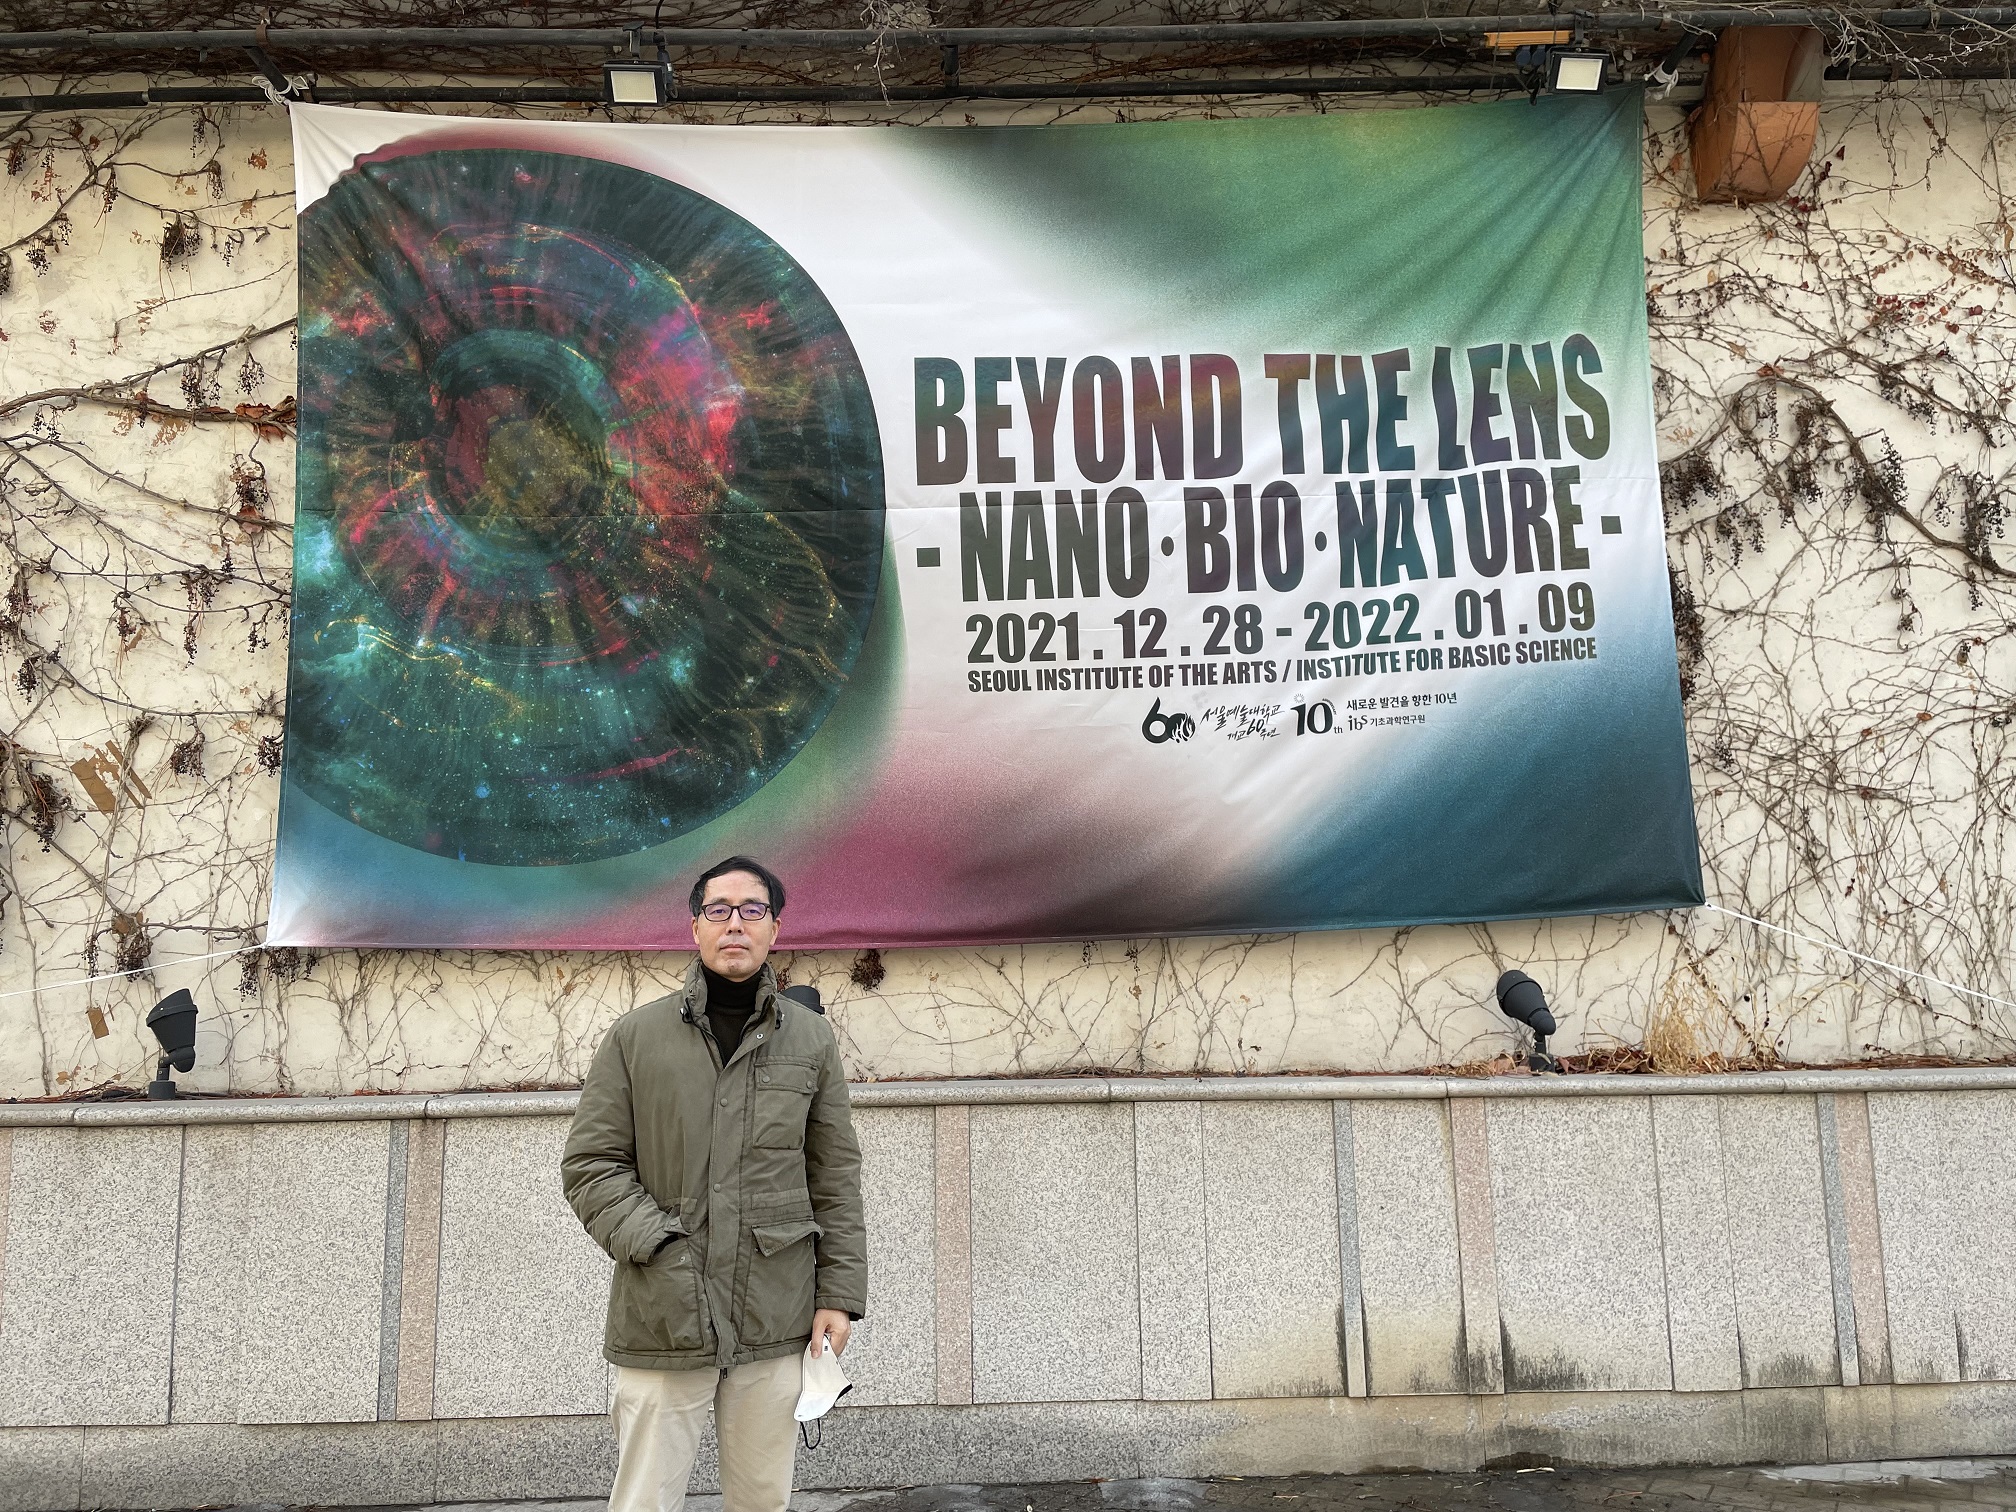 Director Minhaeng Cho in 'Beyond the Lens' Exhibition 사진